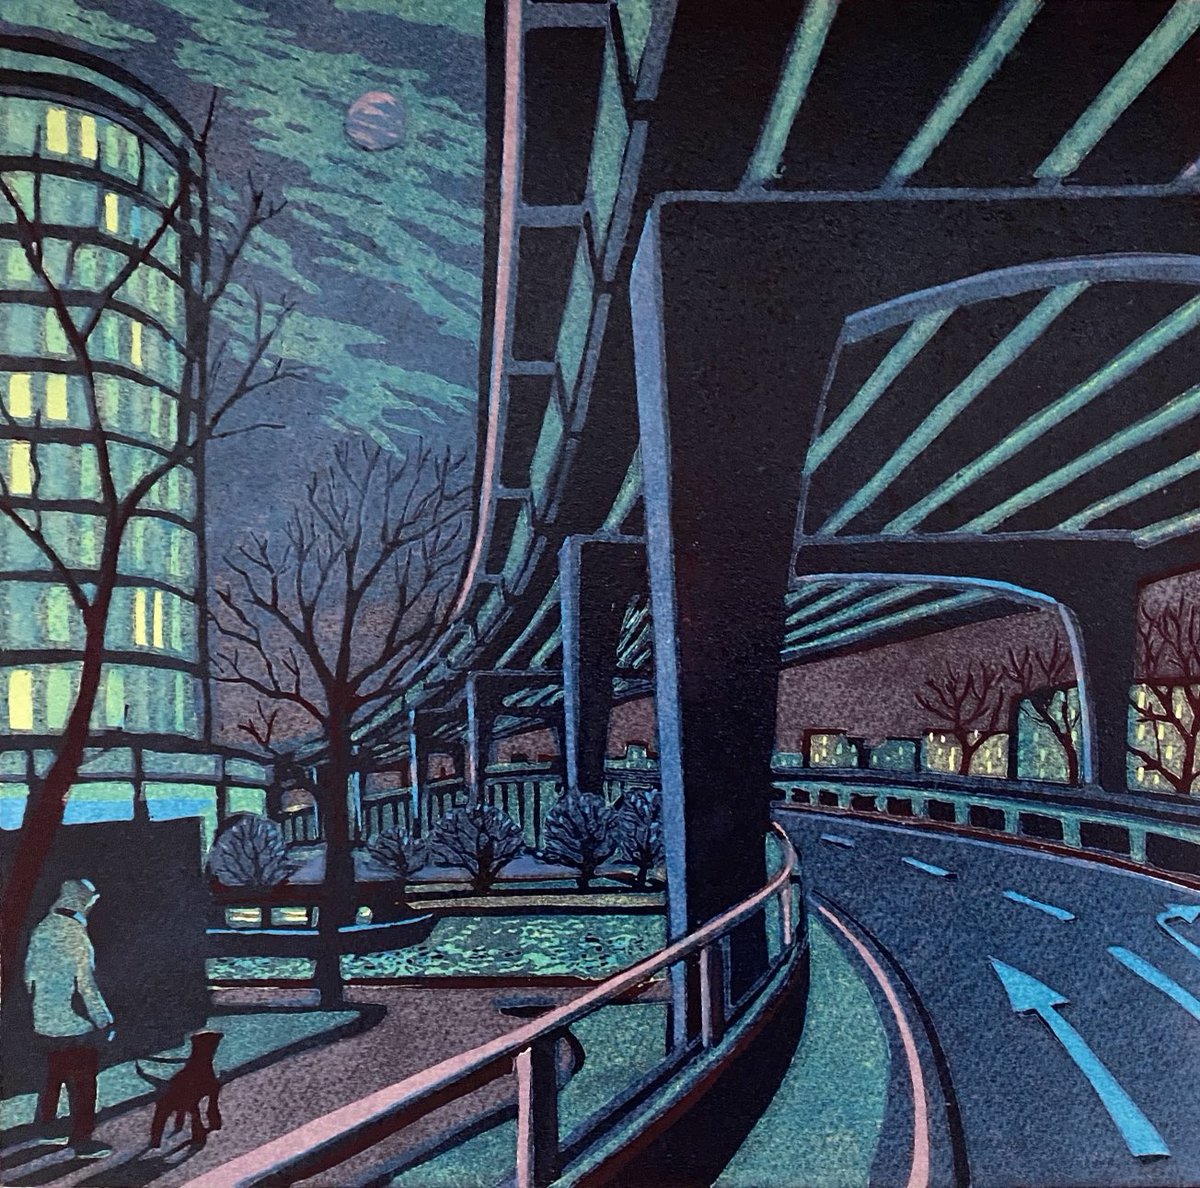 As it’s the last day of #roadsafetyweek, here’s a linocut of that much loved traffic jam in the sky, the Westway. Be careful out there, all you motorists 😬 #westway #Paddington #GrandUnionCanal